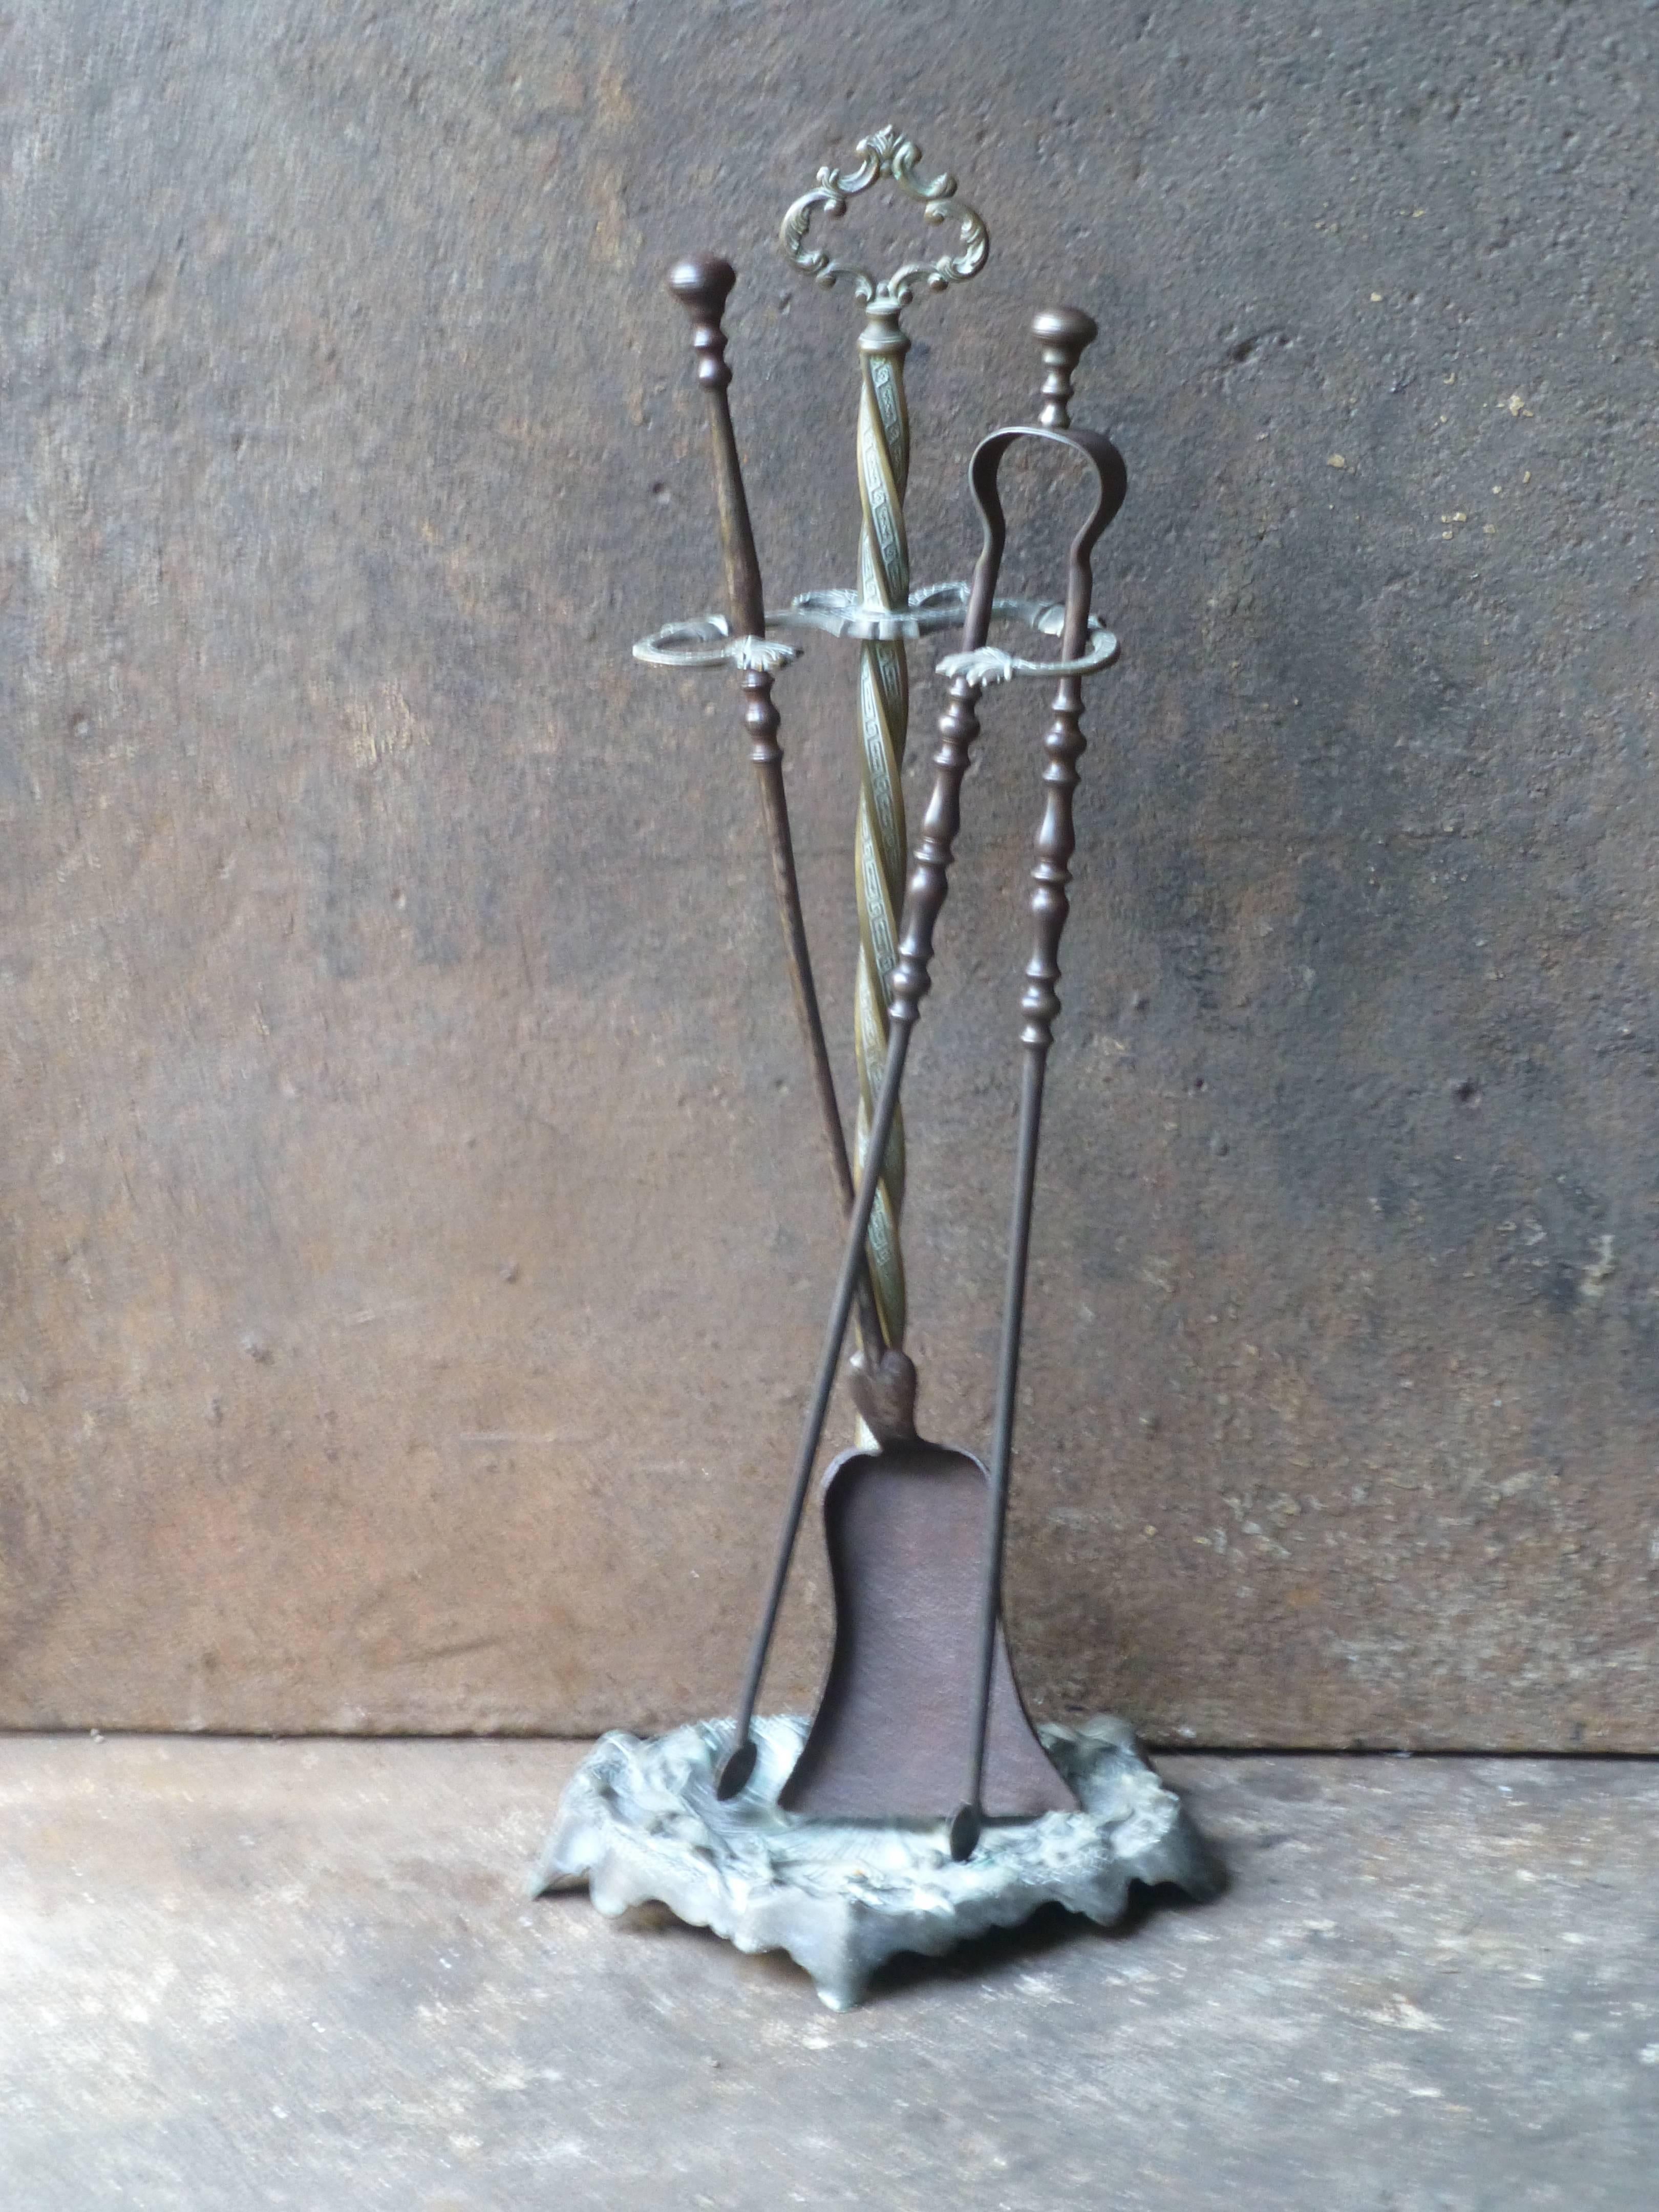 19th century French fireplace tool set made of wrought iron.